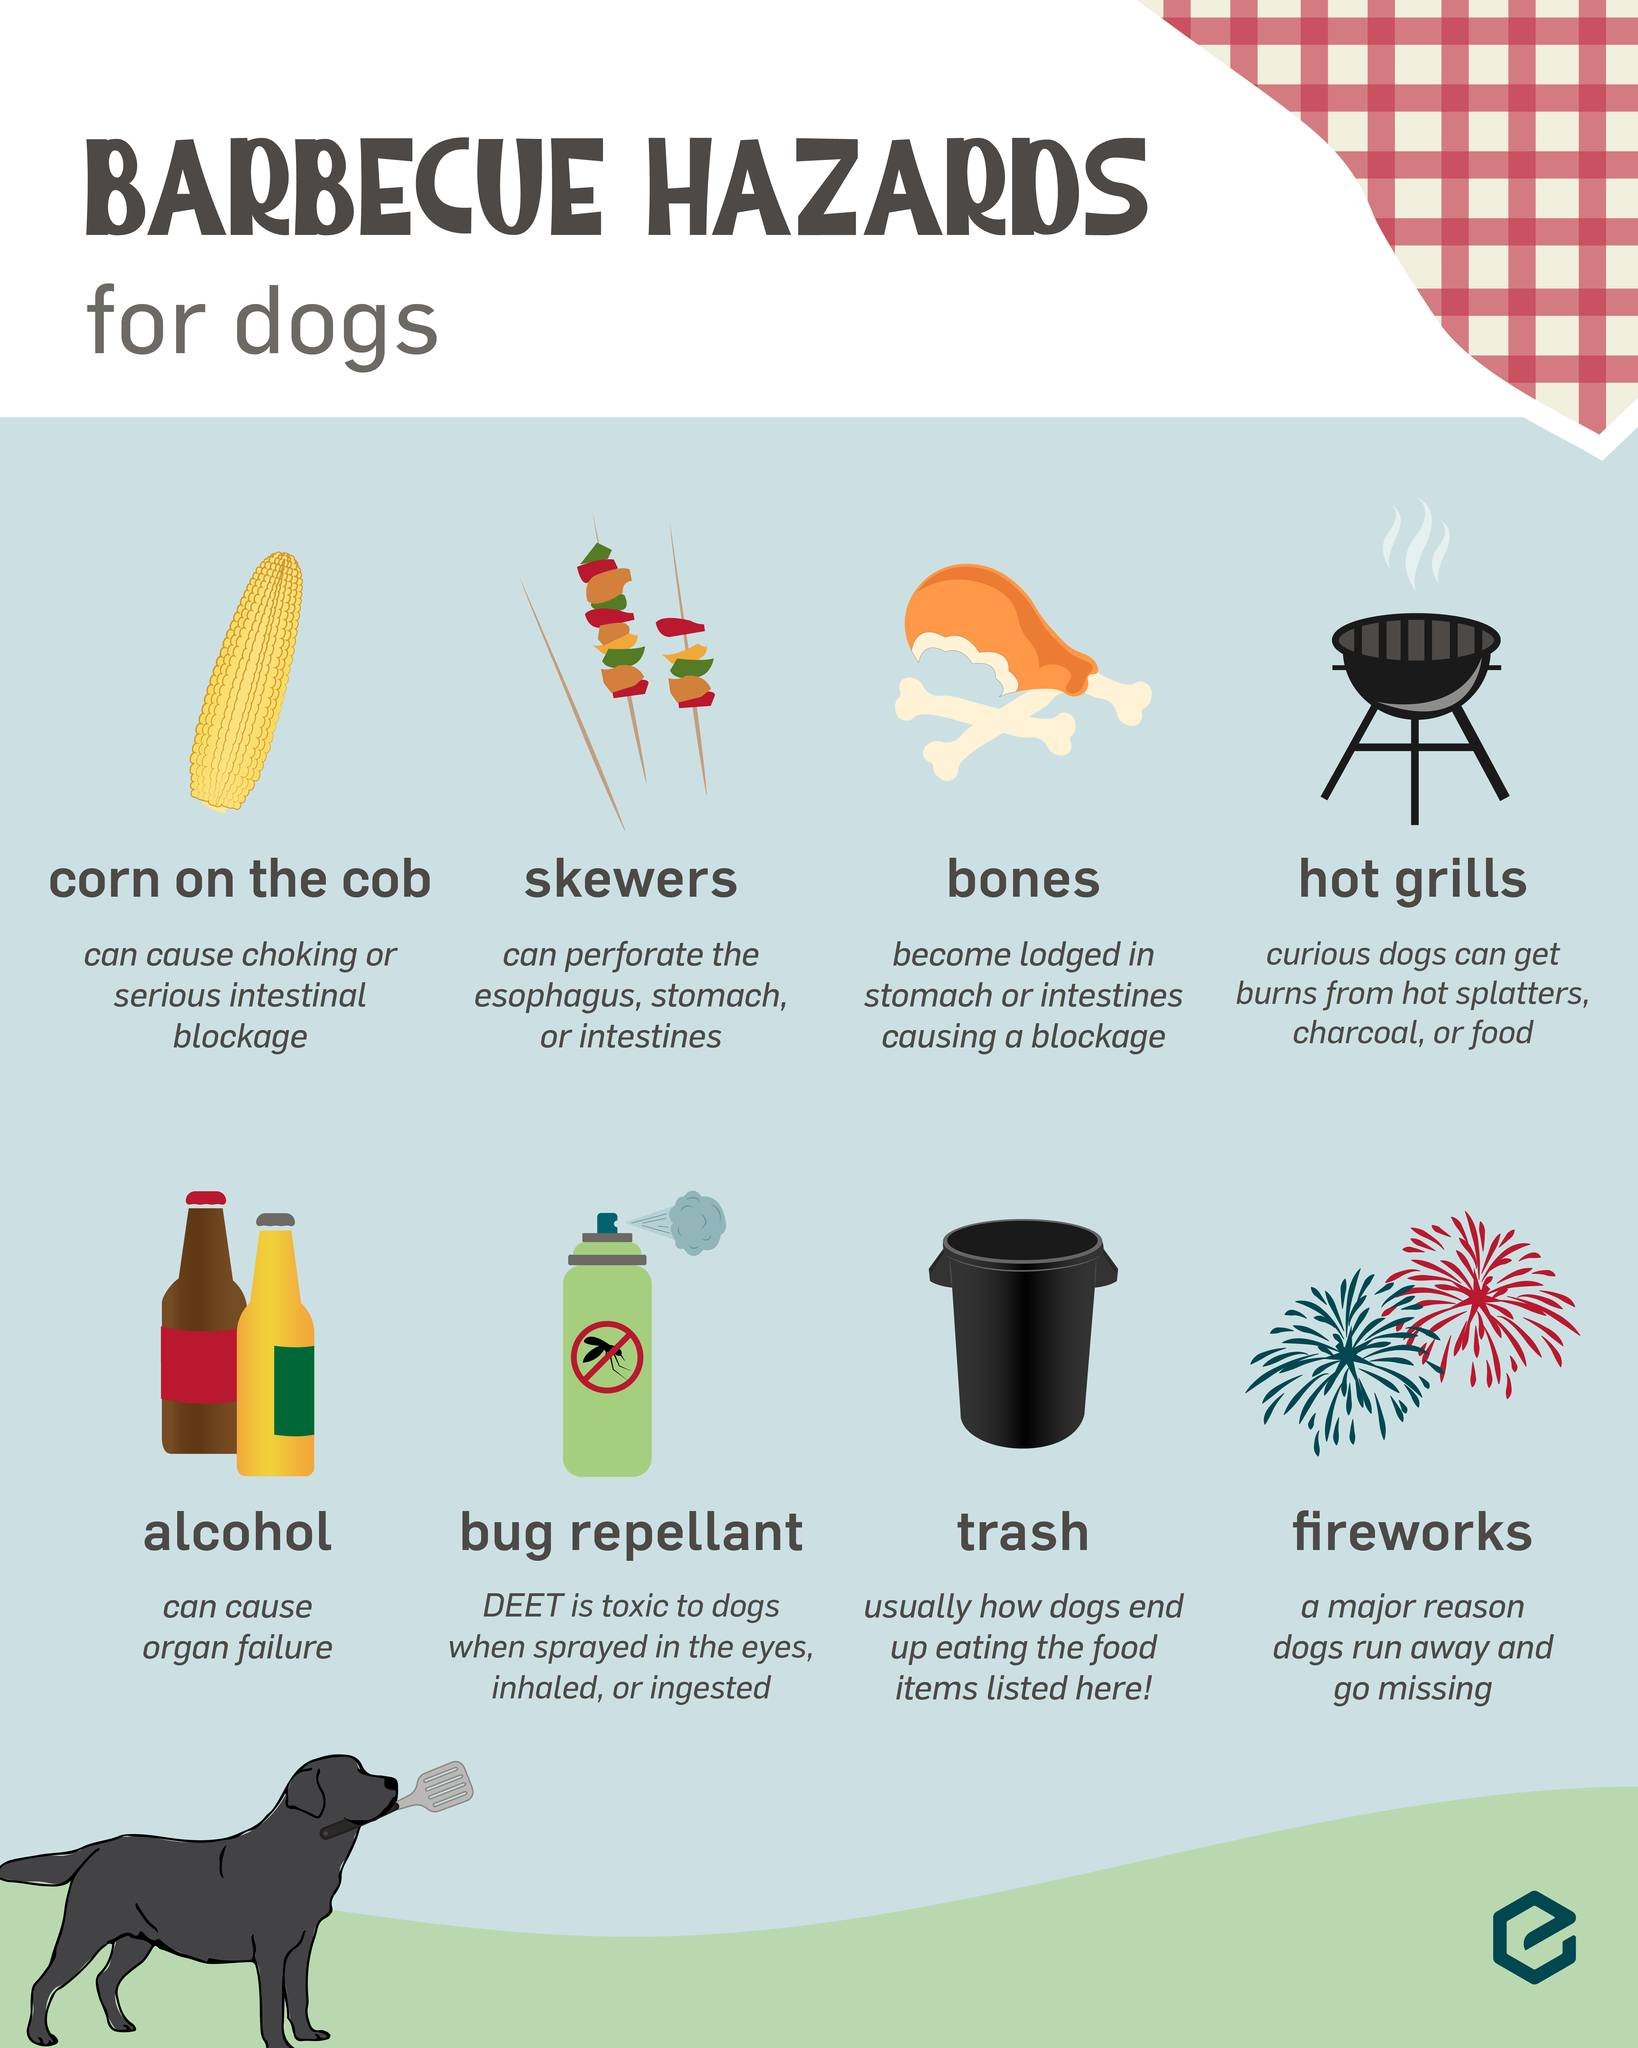 As you gather with family &amp; friends this Summer, keep your furry pals safe with these tips from WVRC (Wisconsin Veterinary Referral Center)! 🐾

From BBQ hazards to hot pavement, ensure your pups stay happy and healthy! 💙

#BBQ #PetSafety #WVRC 